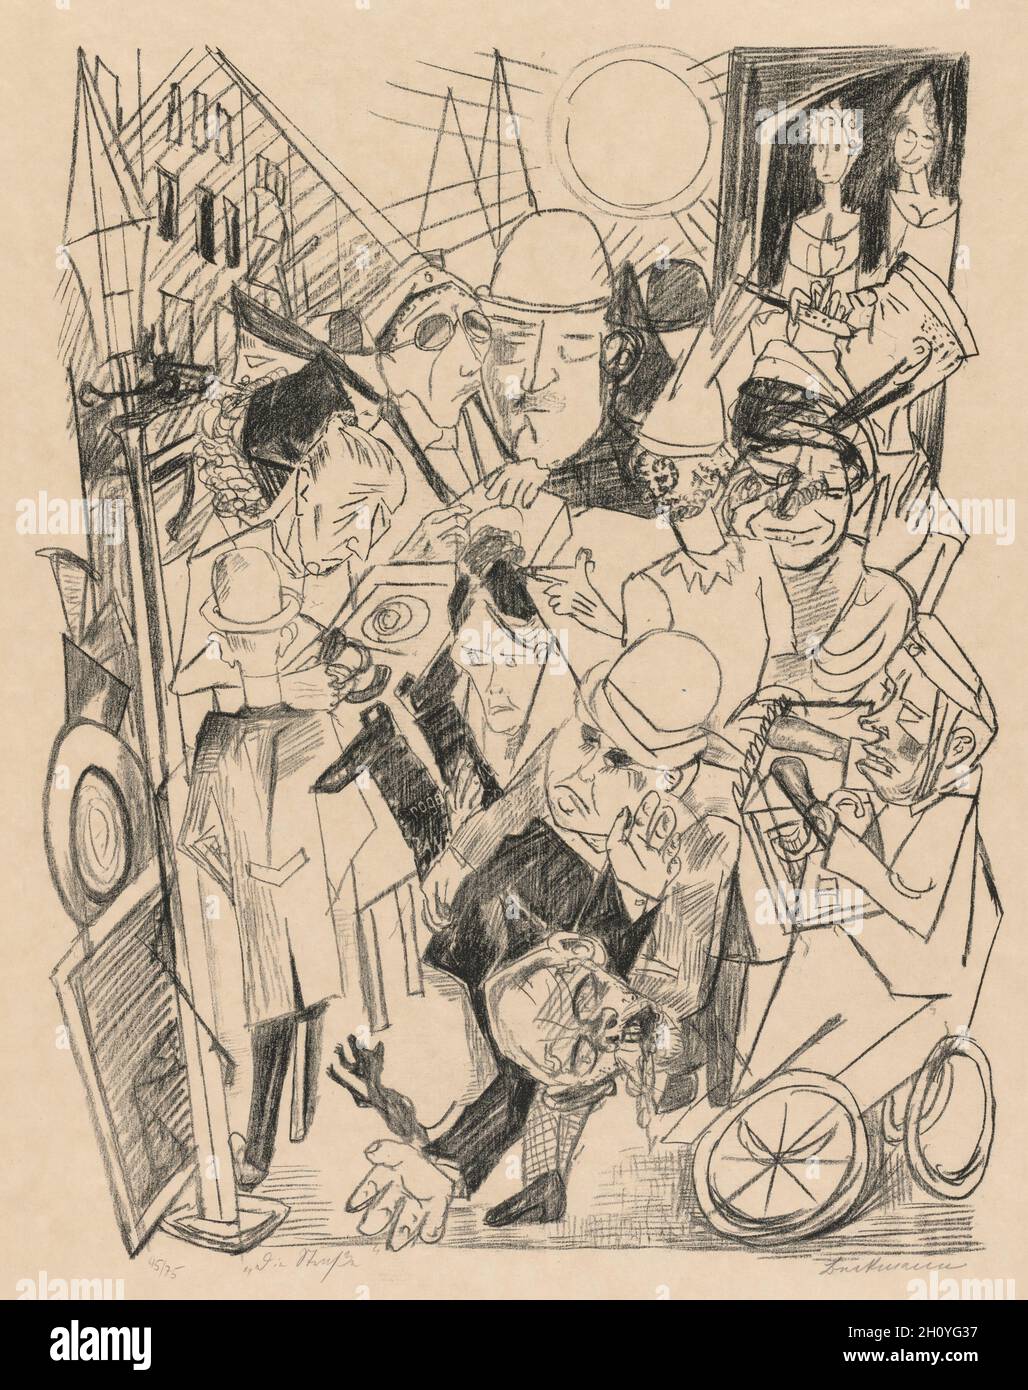 Hell: The Street , 1919. Max Beckmann (German, 1884-1950). Lithograph; sheet: 83.2 x 65.2 cm (32 3/4 x 25 11/16 in.).  After World War I, Max Beckmann produced a portfolio of lithographs under the title Die Holle (Hell). Its publication coincided with civil unrest including heavy street fighting during the so-called November Riots of 1918 that followed Germany’s defeat. Here, the caricatured faces and cropped, overpacked, and stage-like composition portray the ideologues, the war-maimed, the famished, and the deranged. One of Beckmann’s contemporaries, the art historian Paul Schmidt, wrote tha Stock Photo